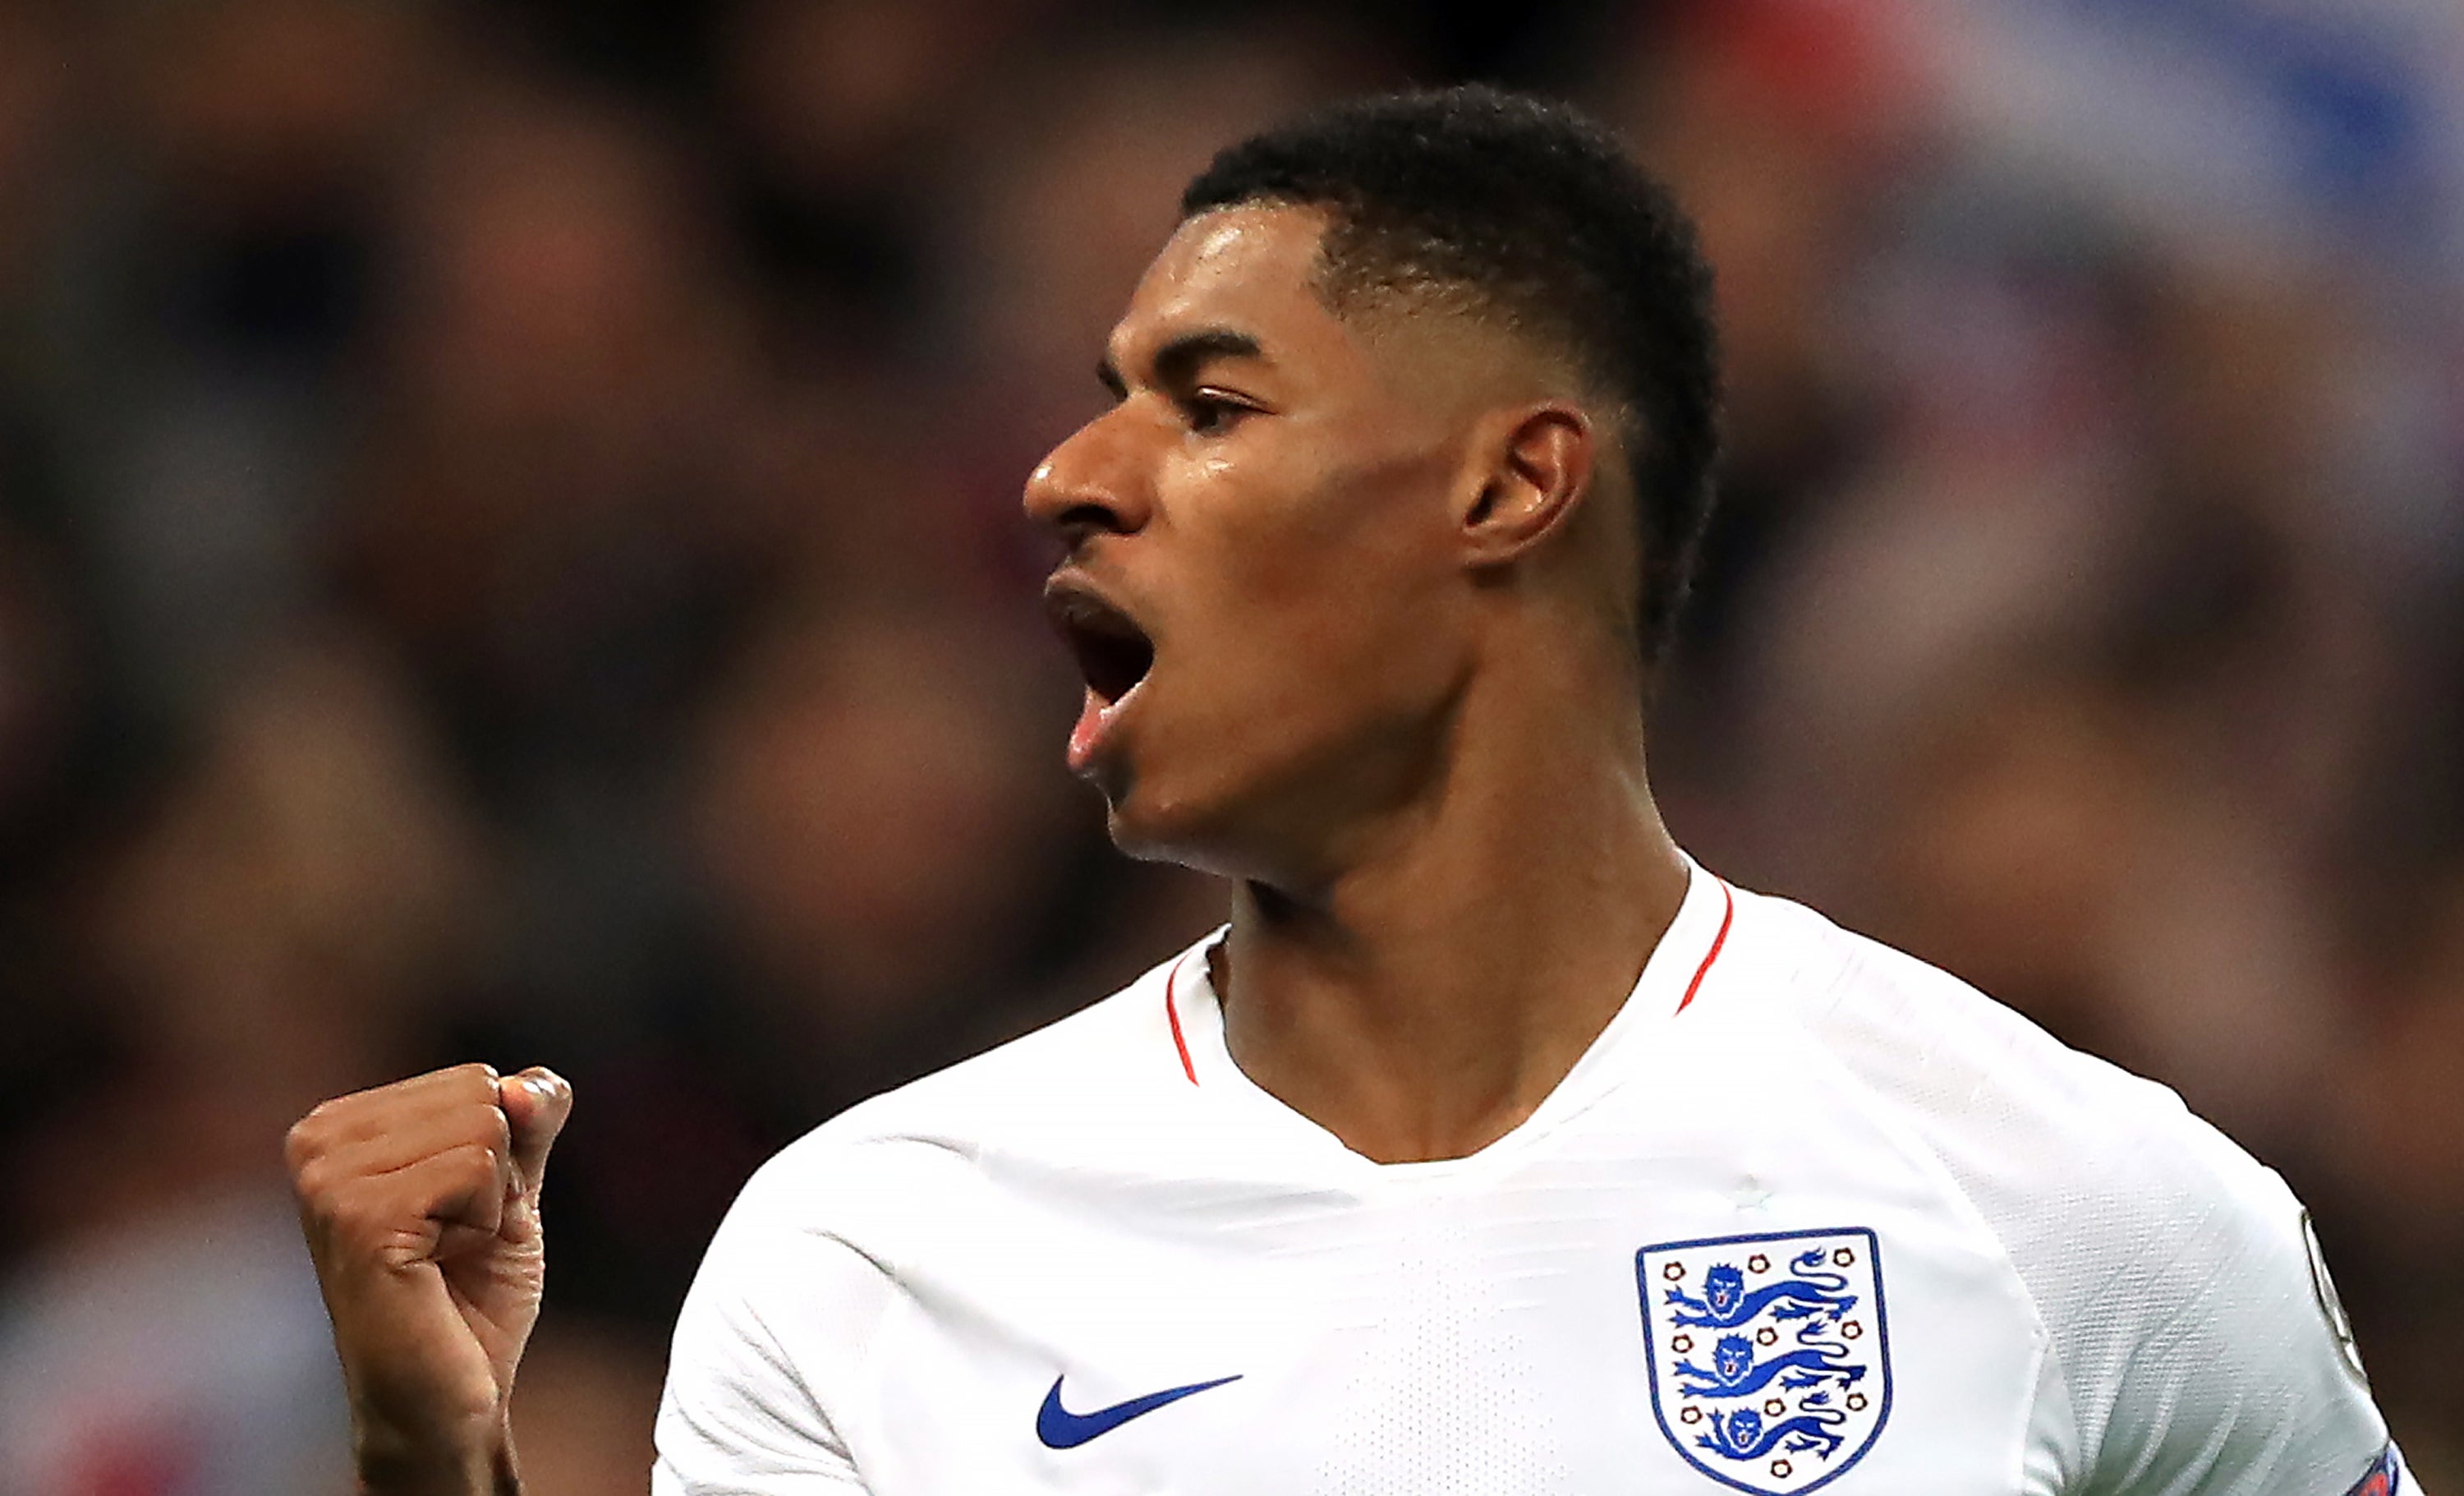 Marcus Rashford was targeted by racist abuse after the Euro 2020 final last summer (Mike Egerton/PA)